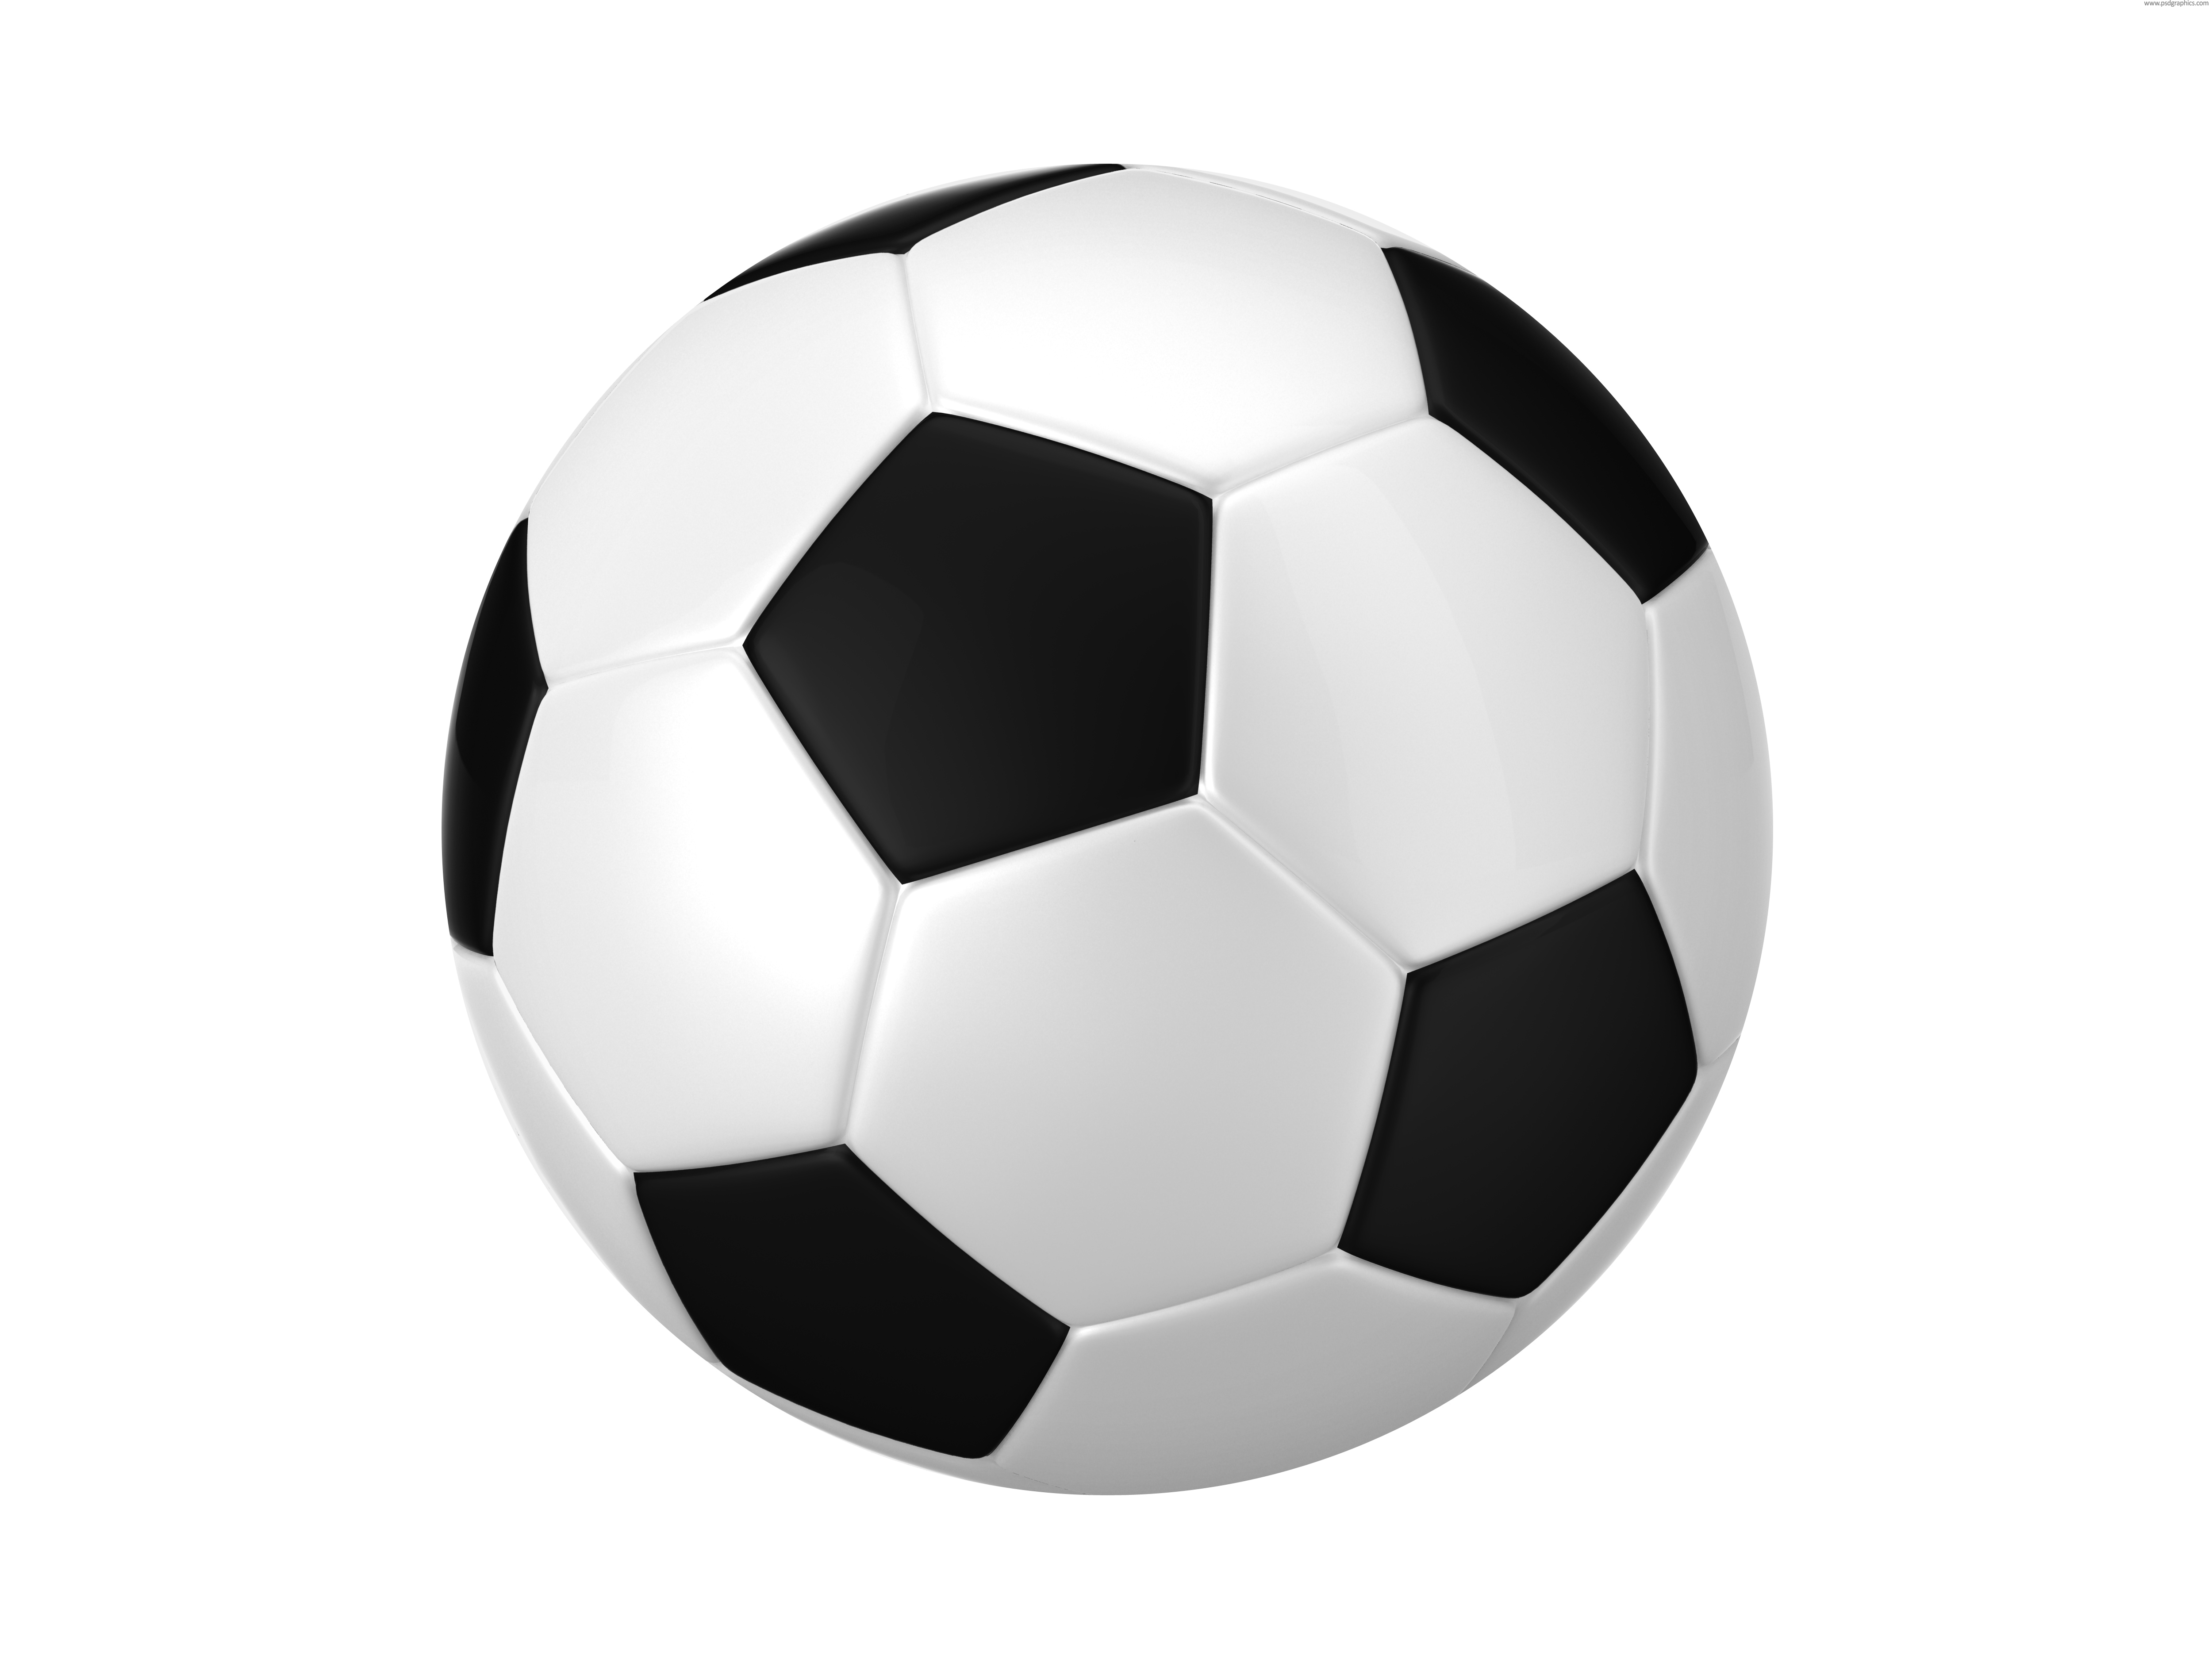 Free Ball Vector, Download Free Clip Art, Free Clip Art on Clipart.